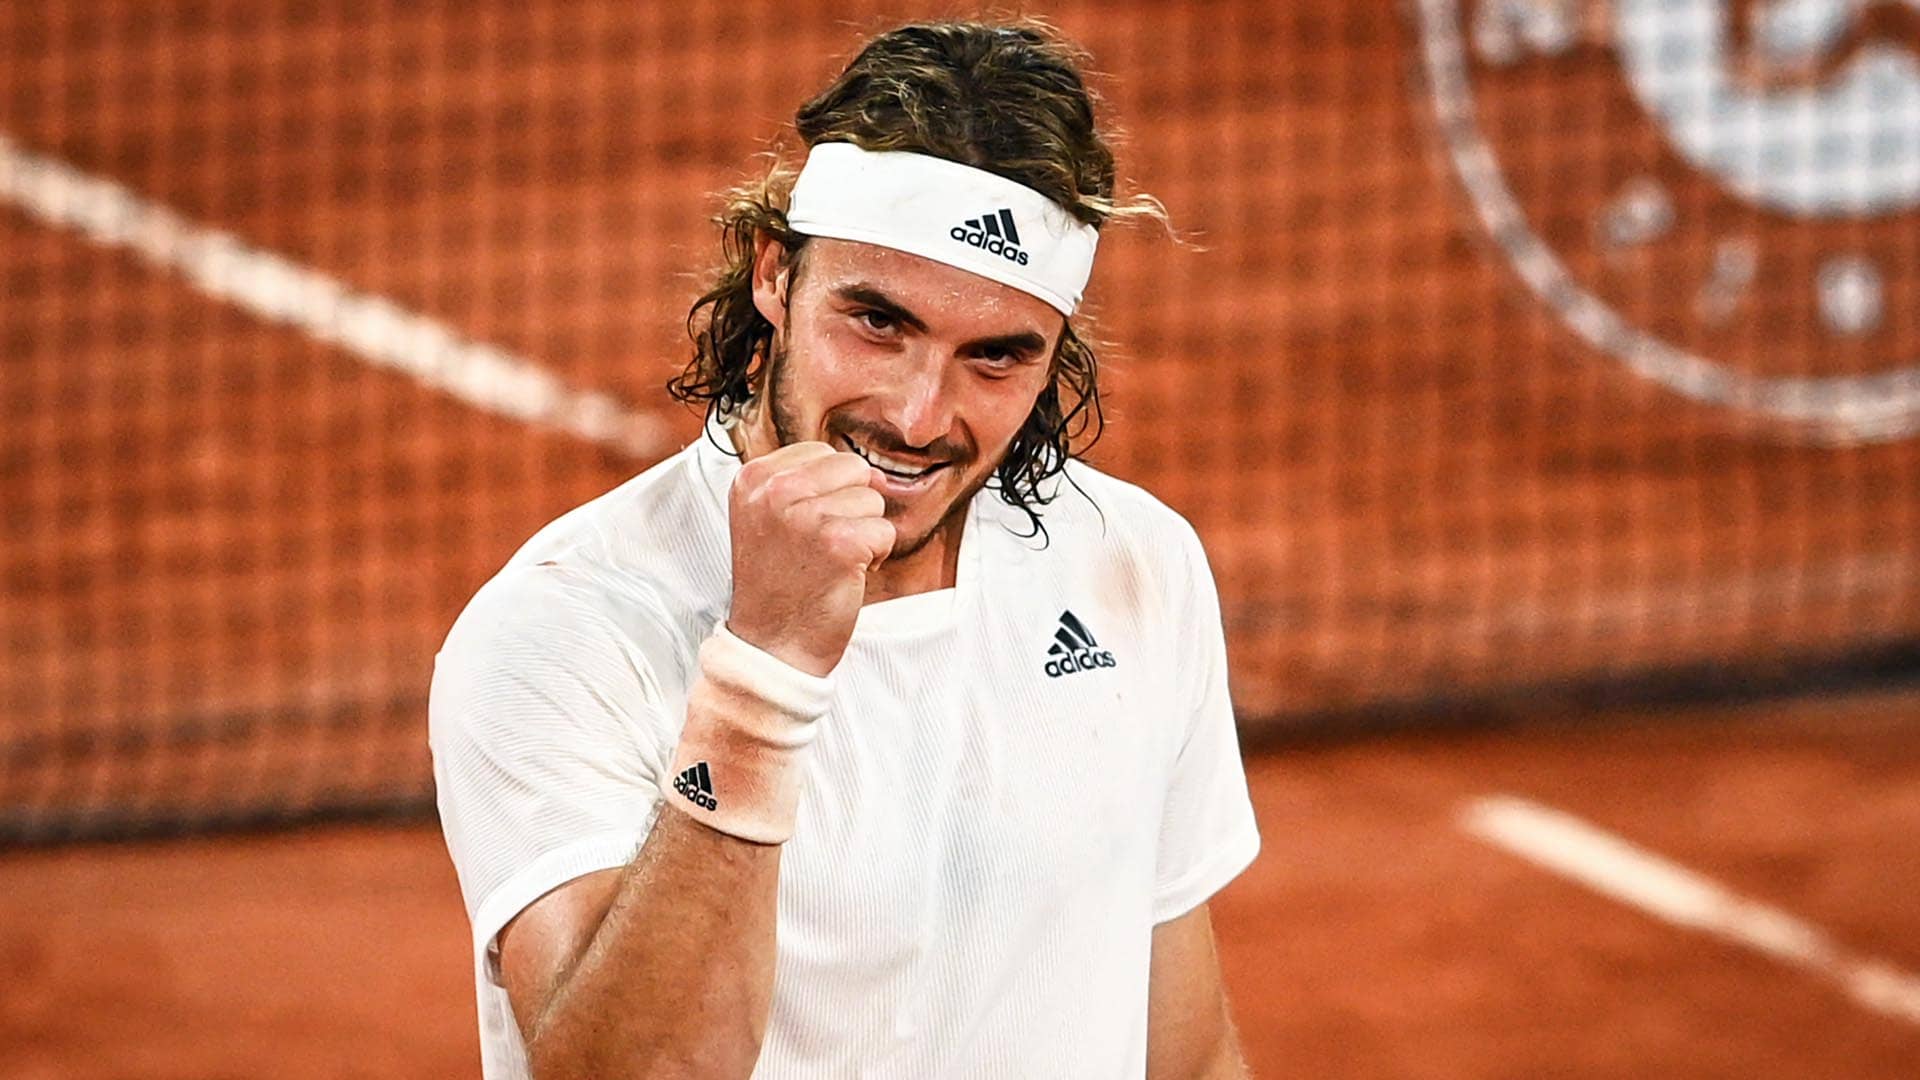 Twitter reacts to Stefanos Tsitsipas reaching final of French Open 2021